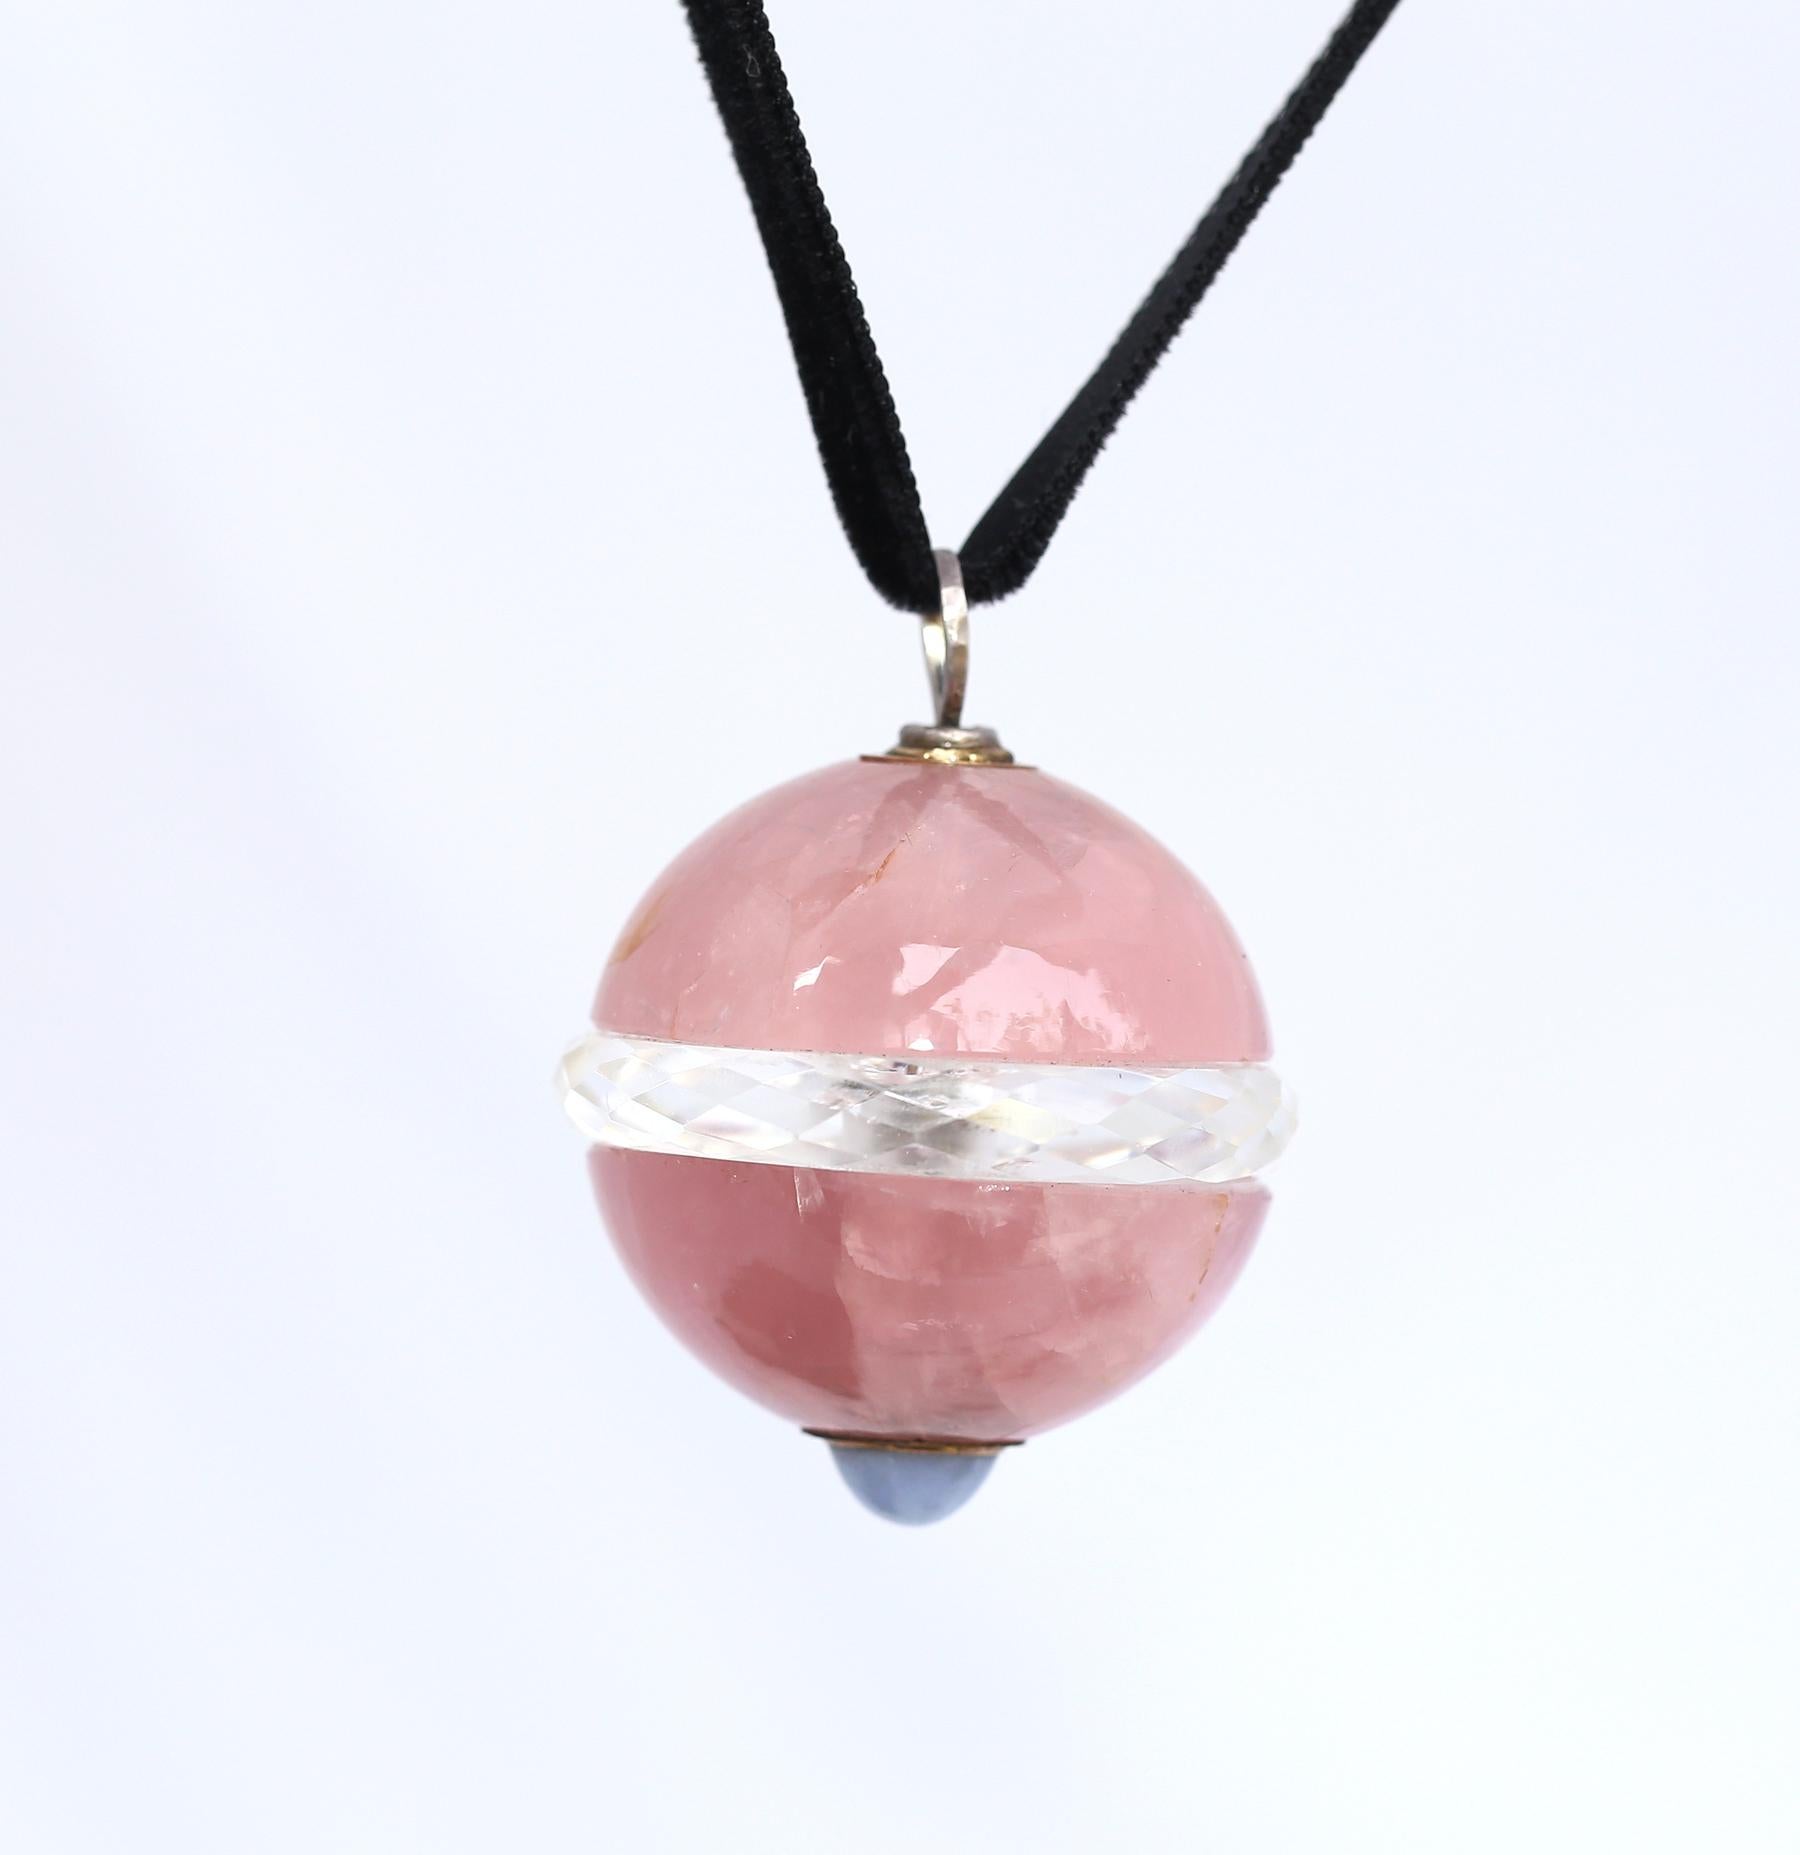 Rock Crystal Rose Quartz Sapphire Pendant, 1900
A massive Pendant, Rock Crystal layer is held between the Rose Quartz halves with a cabochon Sapphire in the bottom. 1900 Stylish antique items represent the sustainable trend in fashion, when